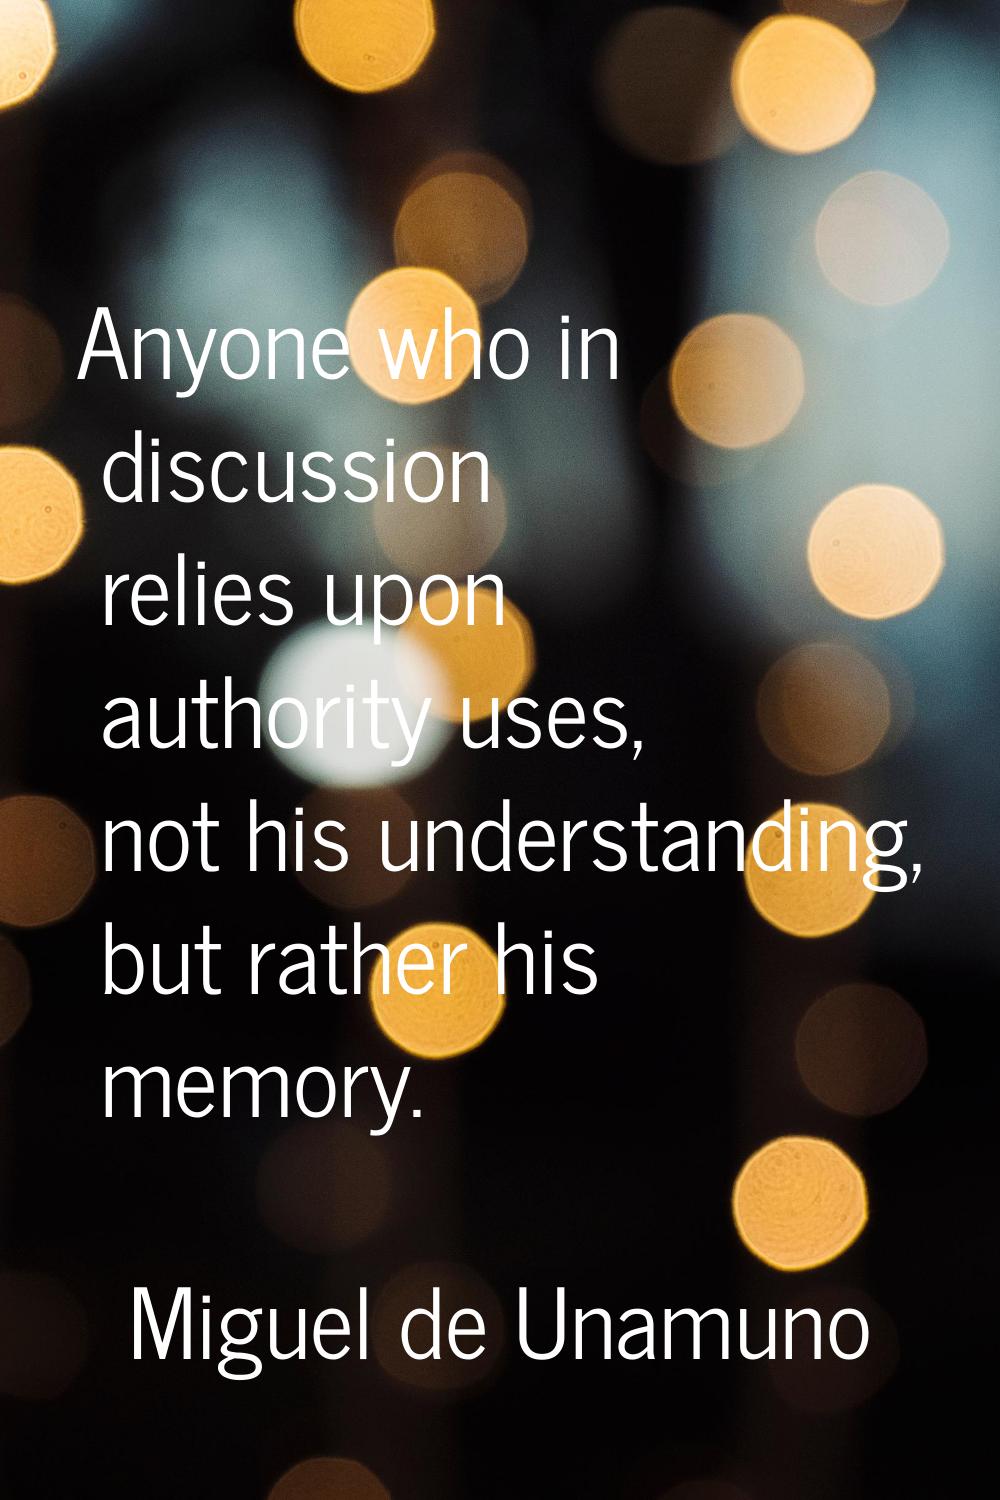 Anyone who in discussion relies upon authority uses, not his understanding, but rather his memory.